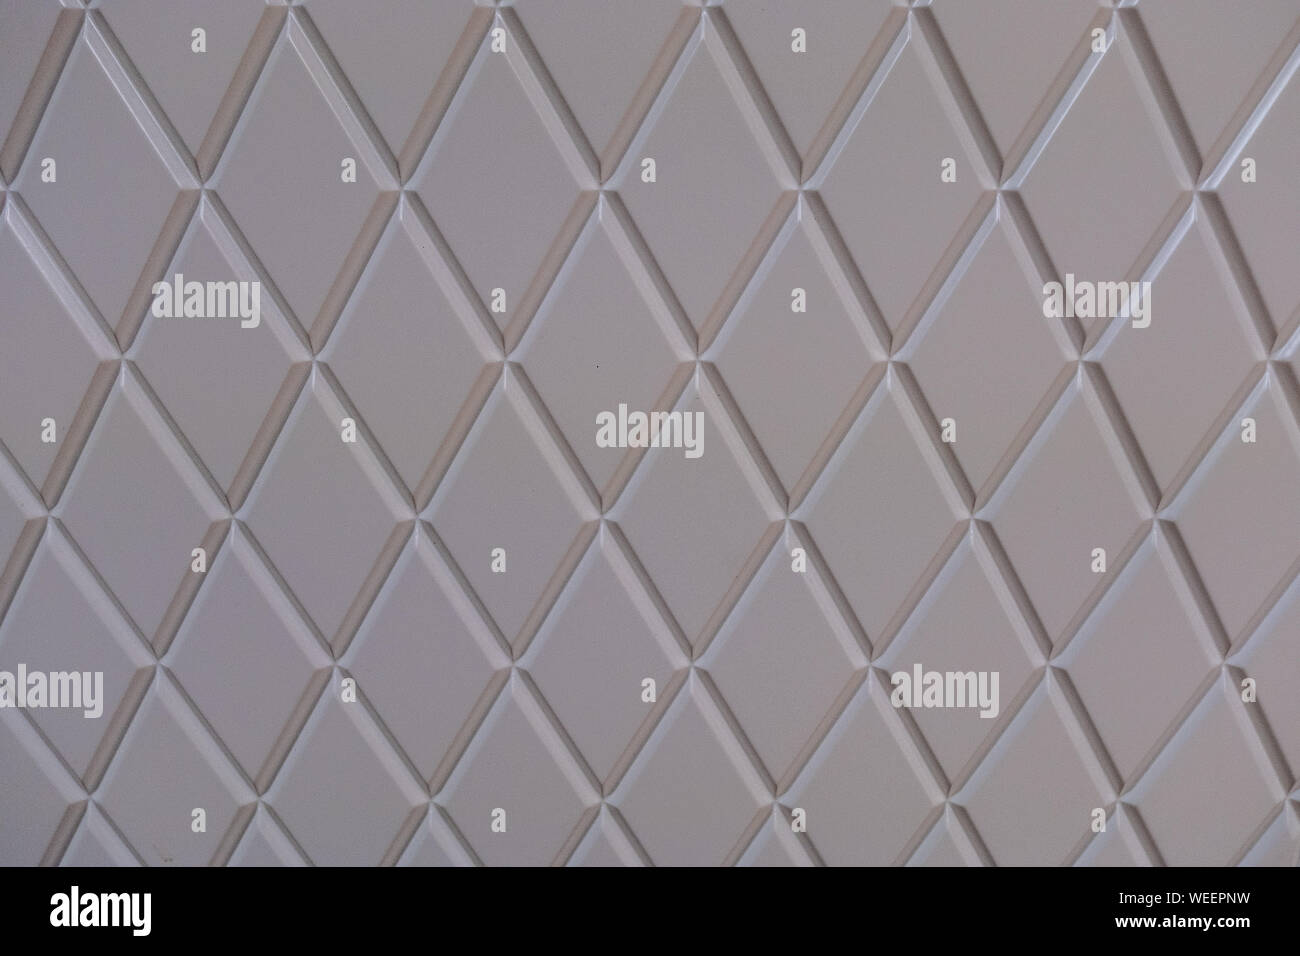 Abstract white geometric pattern with rhombuses. Stock Photo